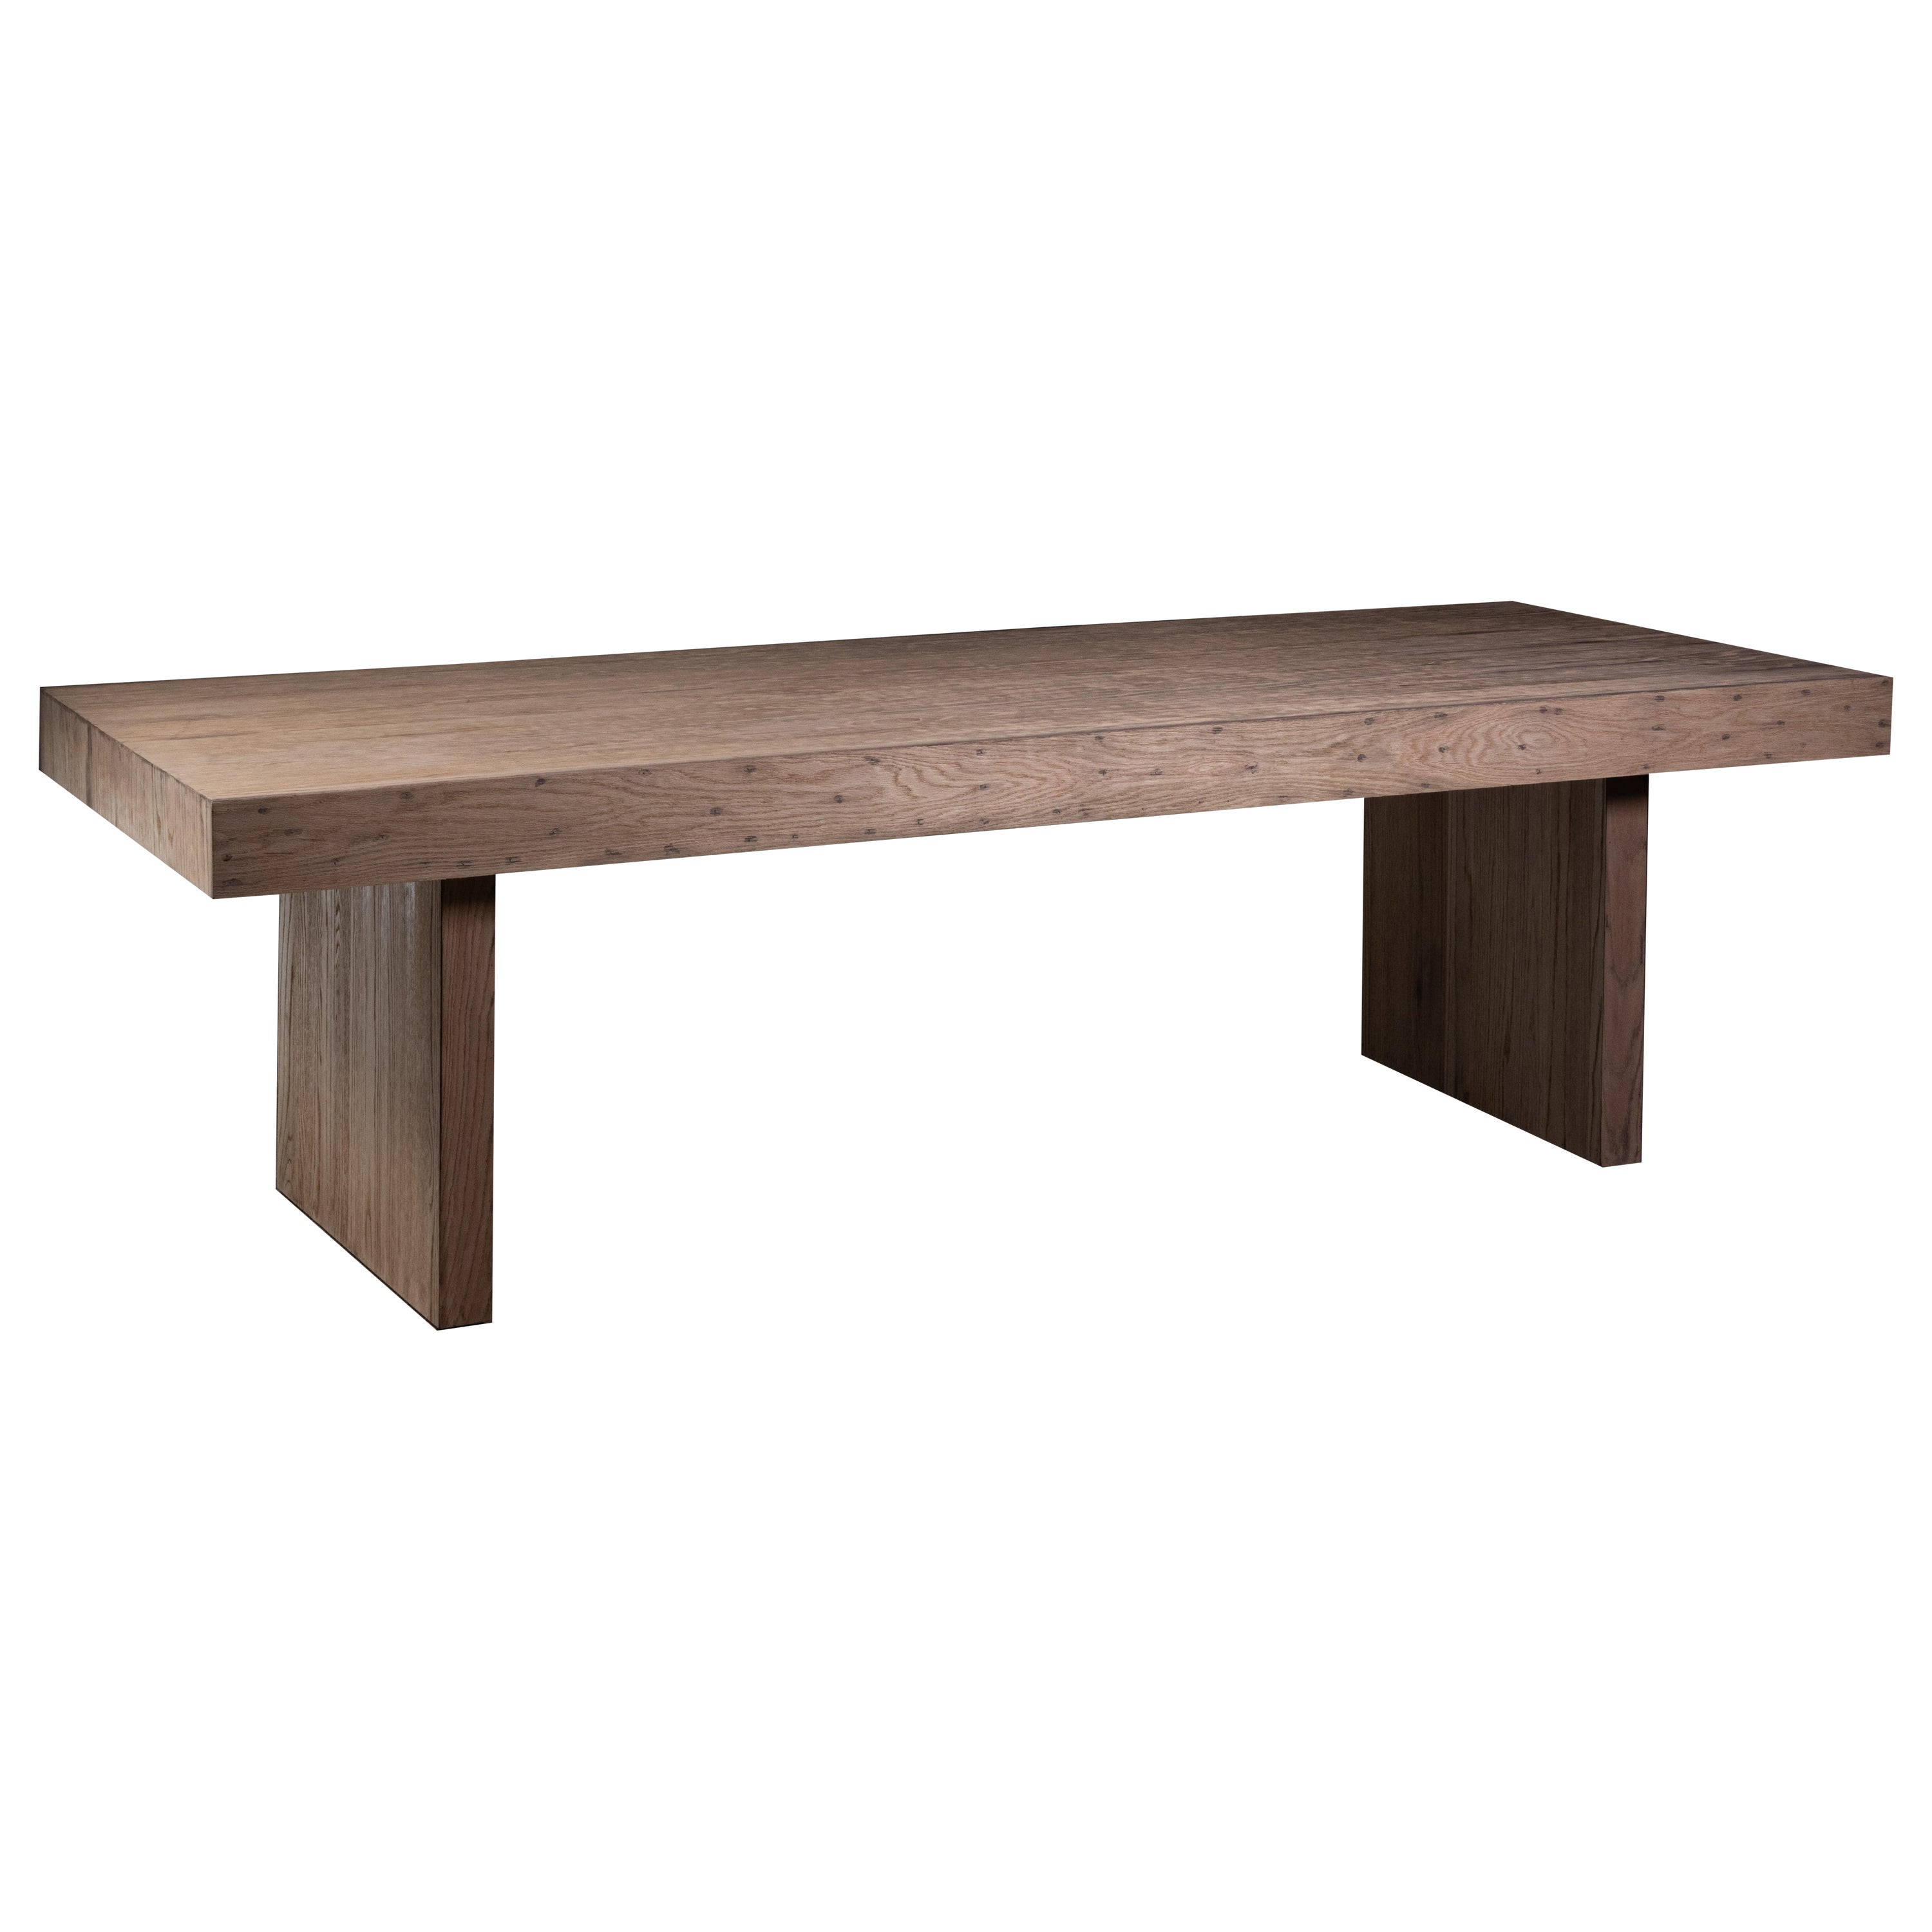 1957 Natural Oak Dining Table